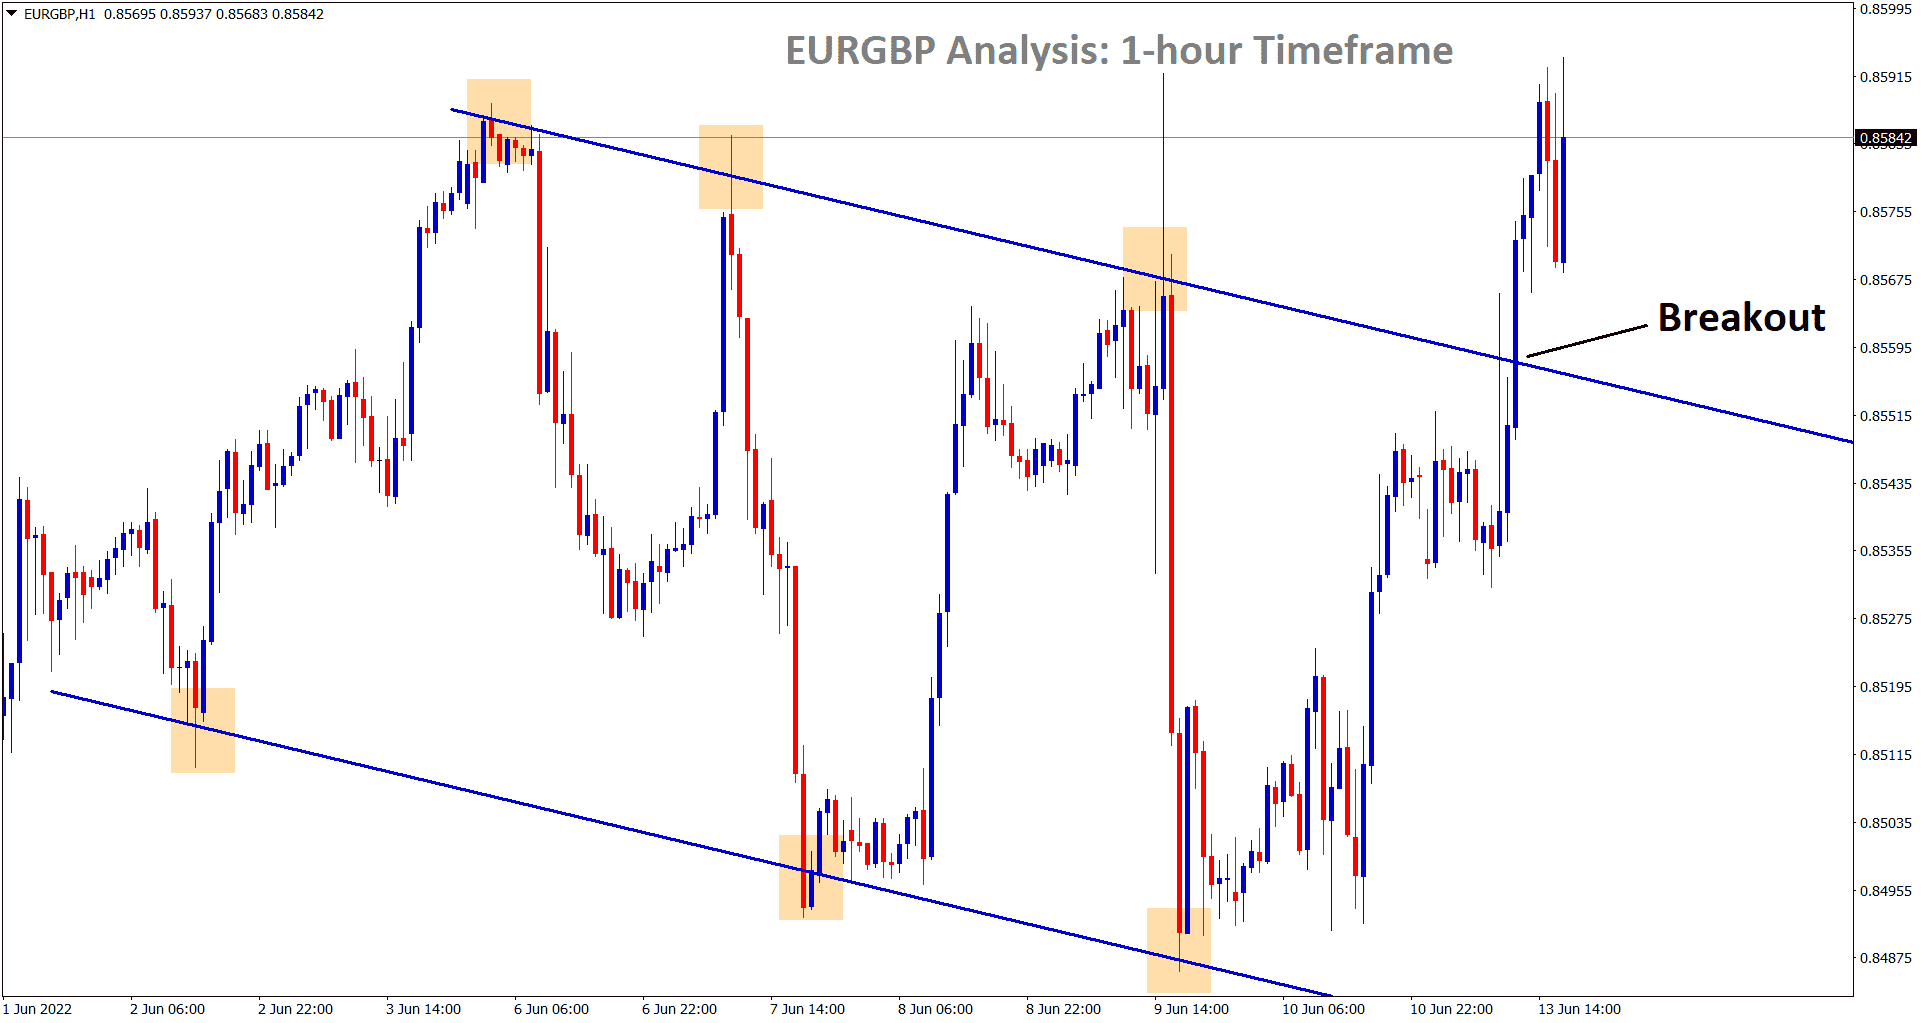 EURGBP has broken the lower high of the minor descending channel